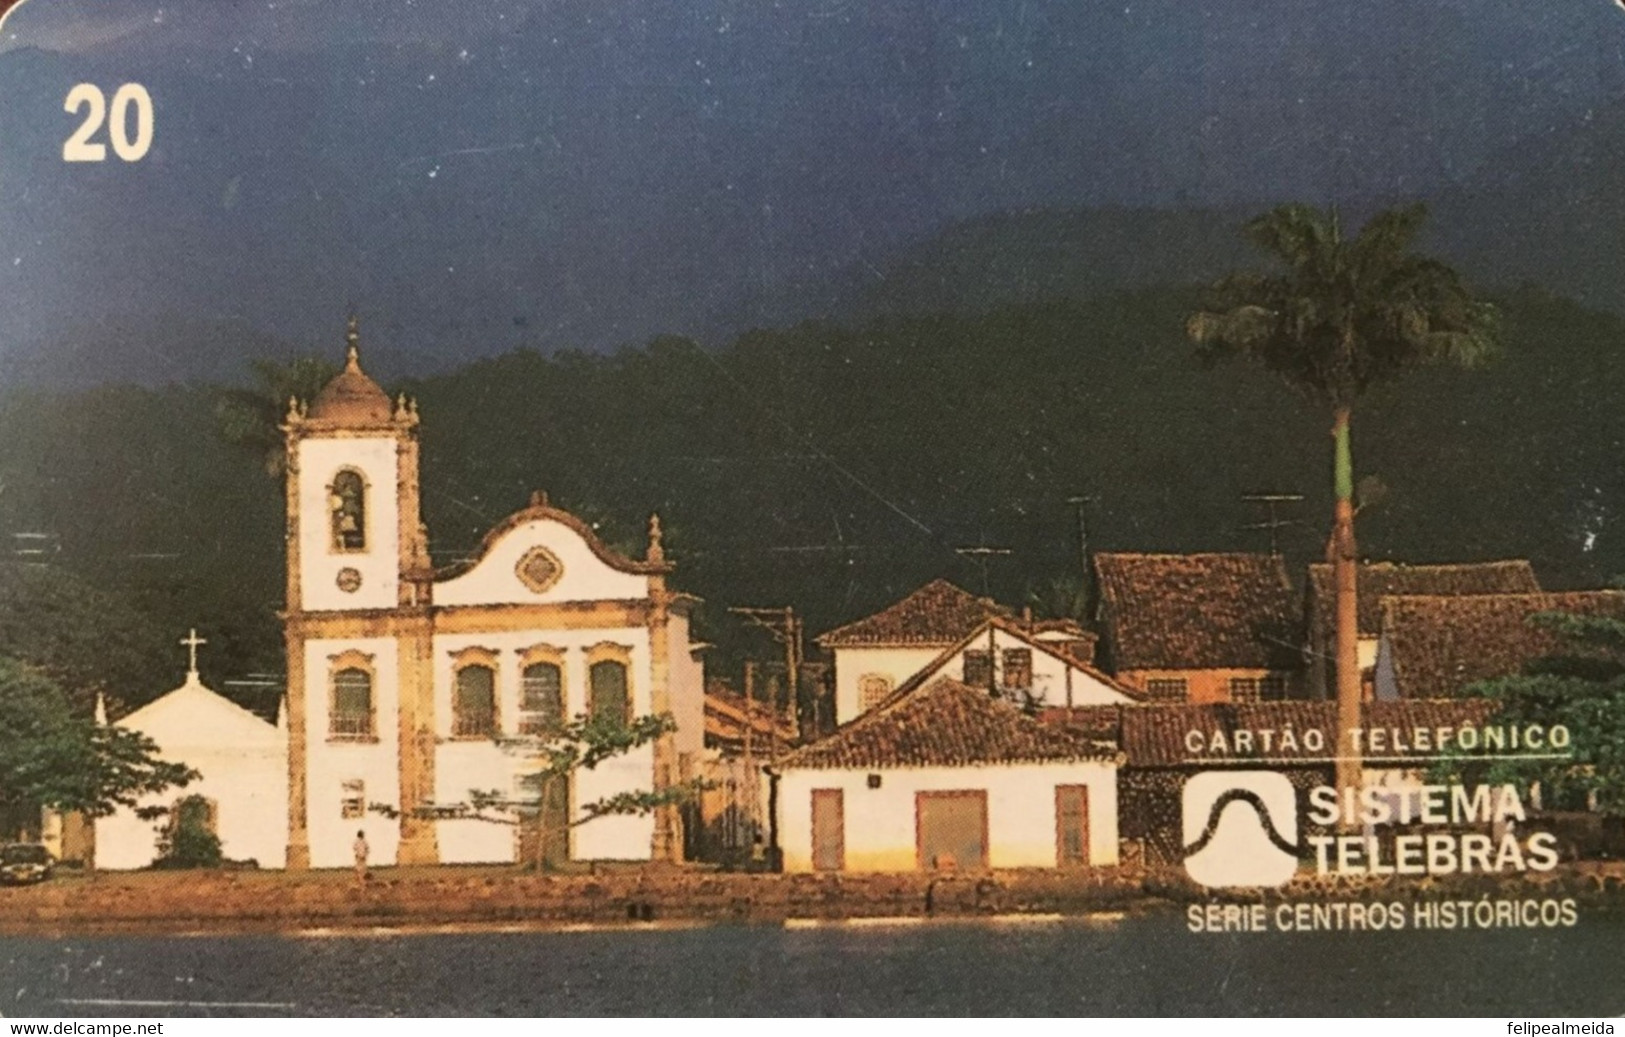 Phone Card Produced By Telebras In 1999 - Series Historic Centers - Photo Of The Building Of The National Historic Museu - Cultural